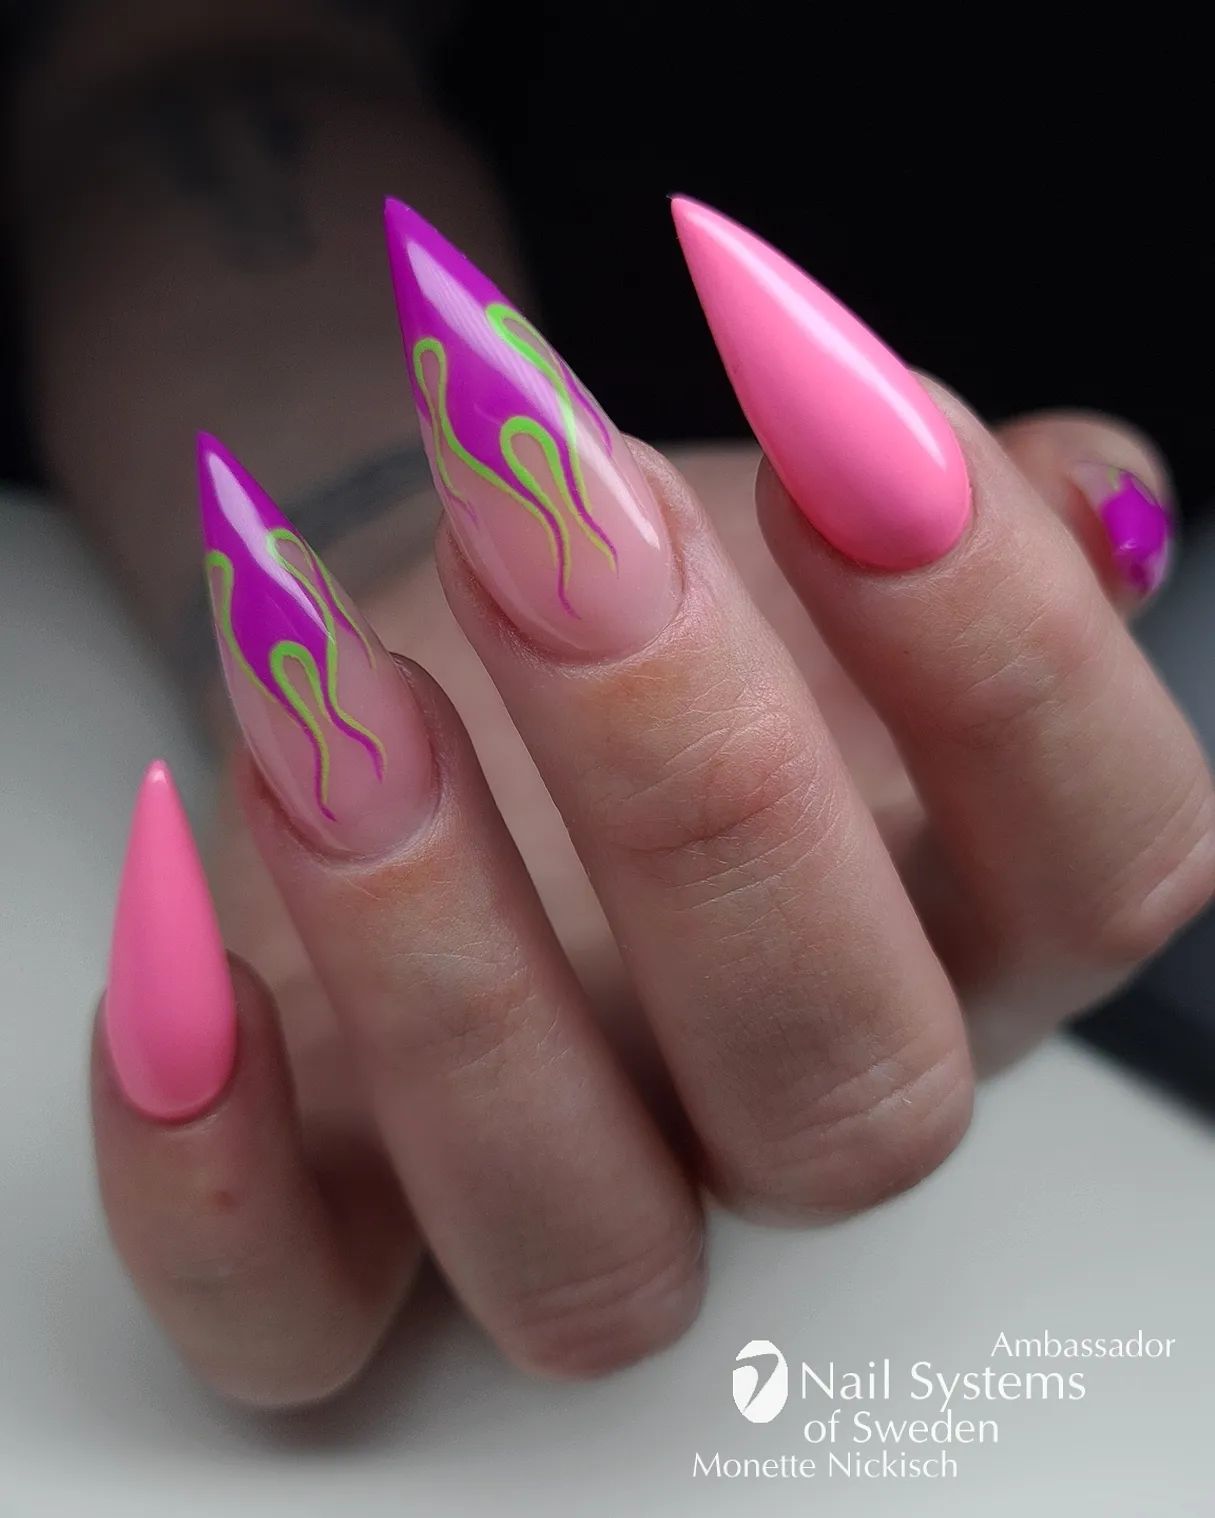 Do you fancy the combination of pink and purple? If yes, this nail art idea is a one to adore. Apply pink nail polish to two of your nails and draw purple flames with green edges. This is all you need to shine.